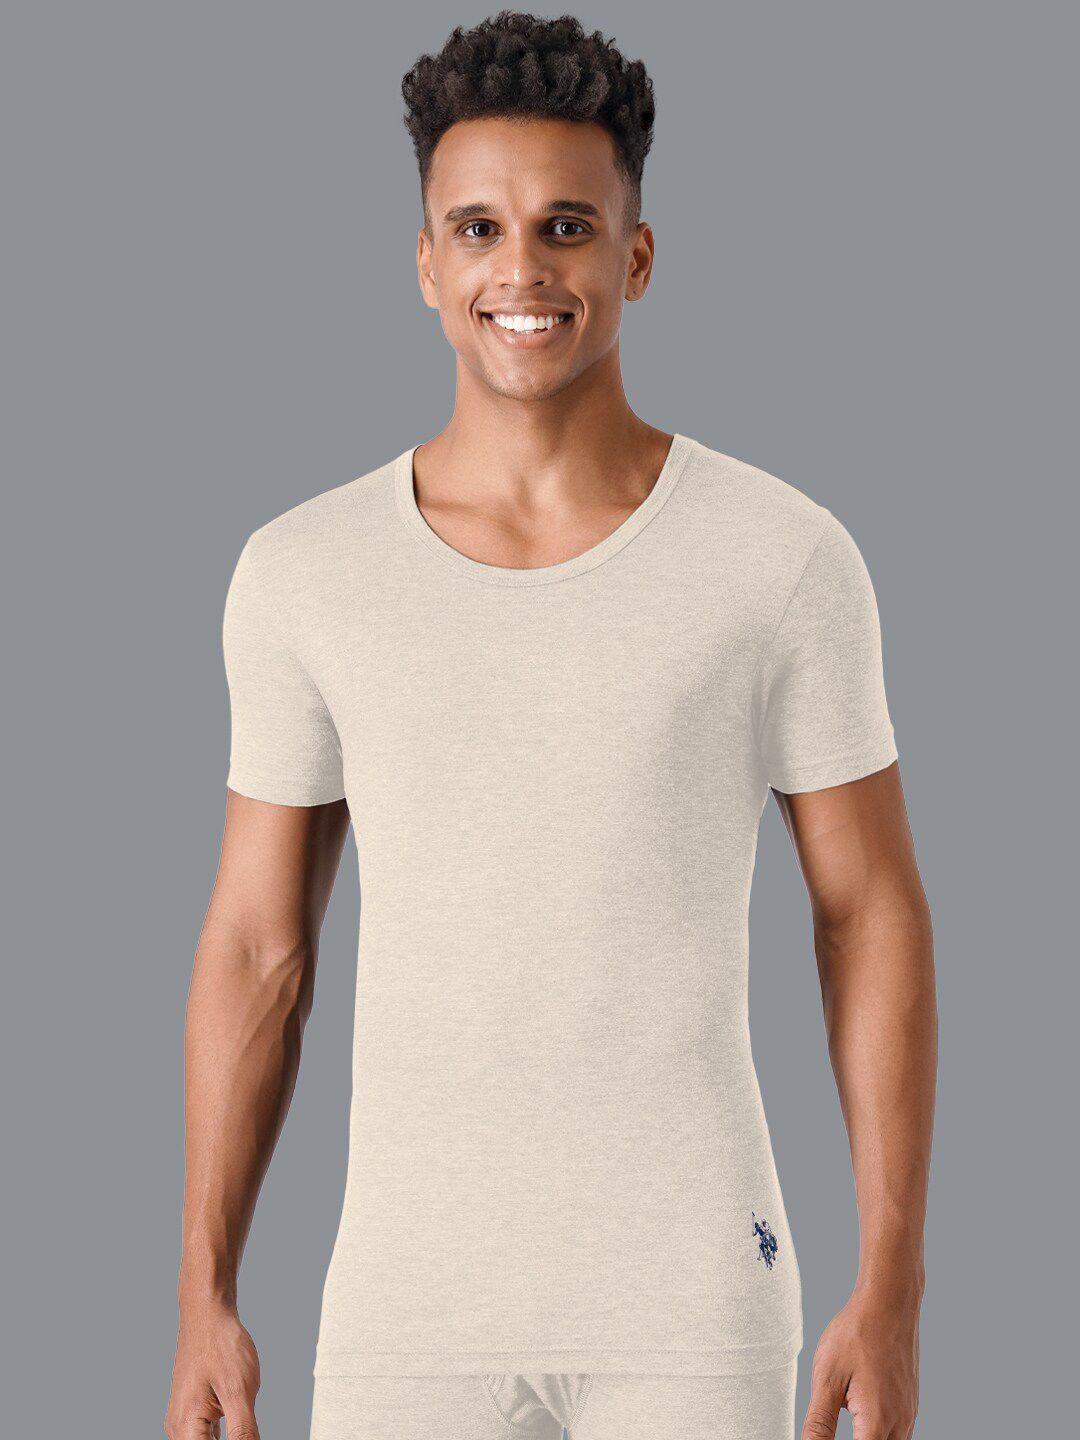 u.s. polo assn. men beige colored solid thermal tops